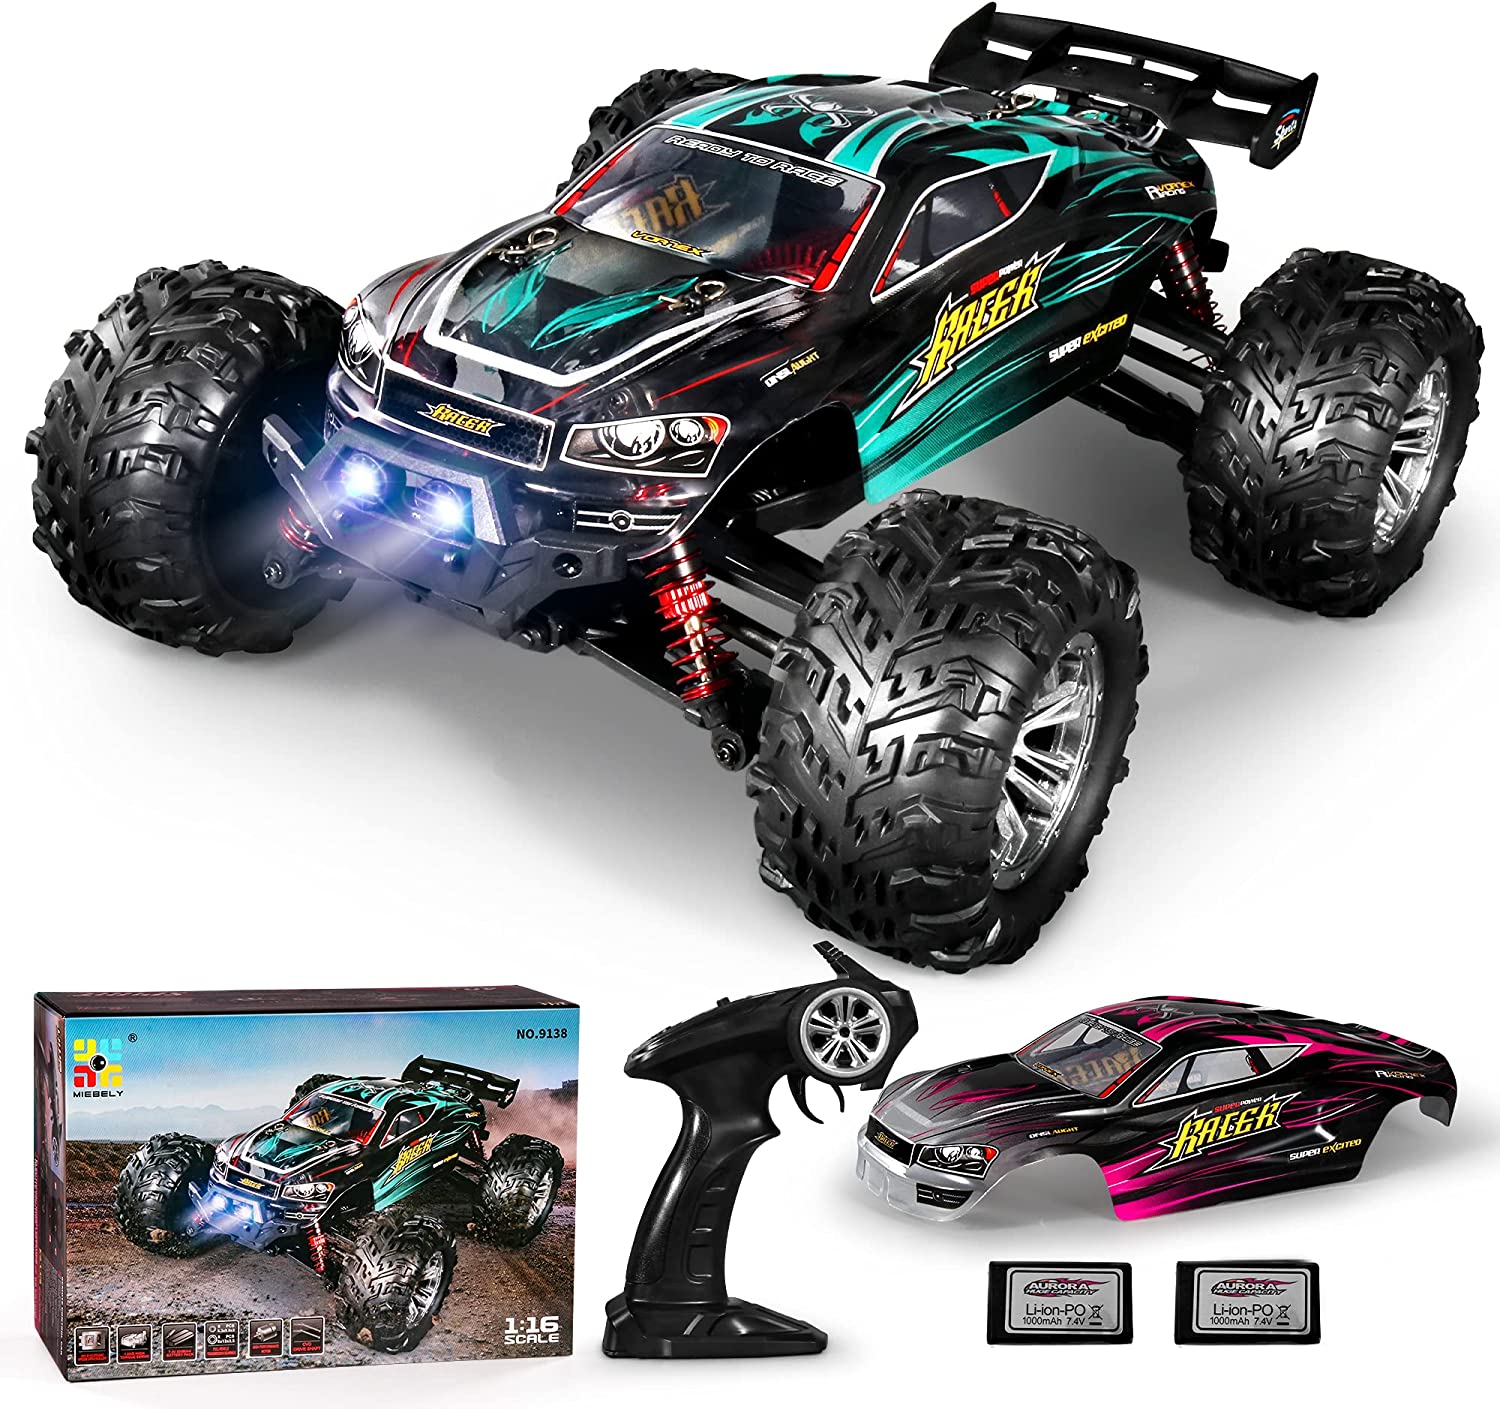 MIEBELY RC Cars 1: 16 Scale All Terrain 4x4 Remote Control Car for Adu